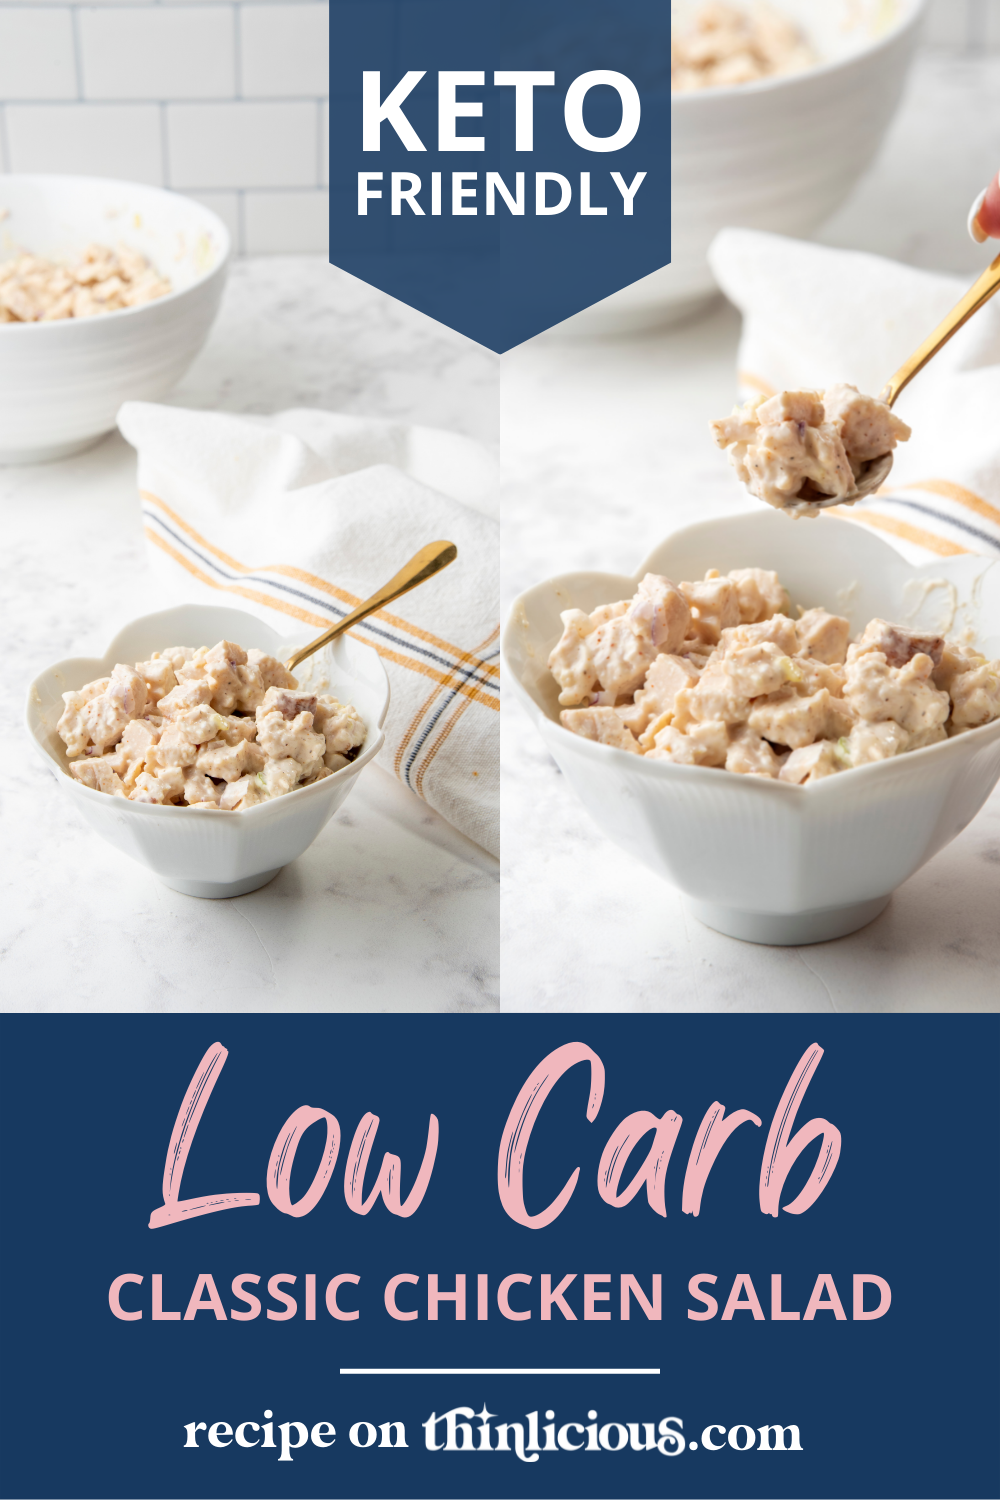 The Best Low Carb Chicken Salad (A Classic Recipe) - Thinlicious